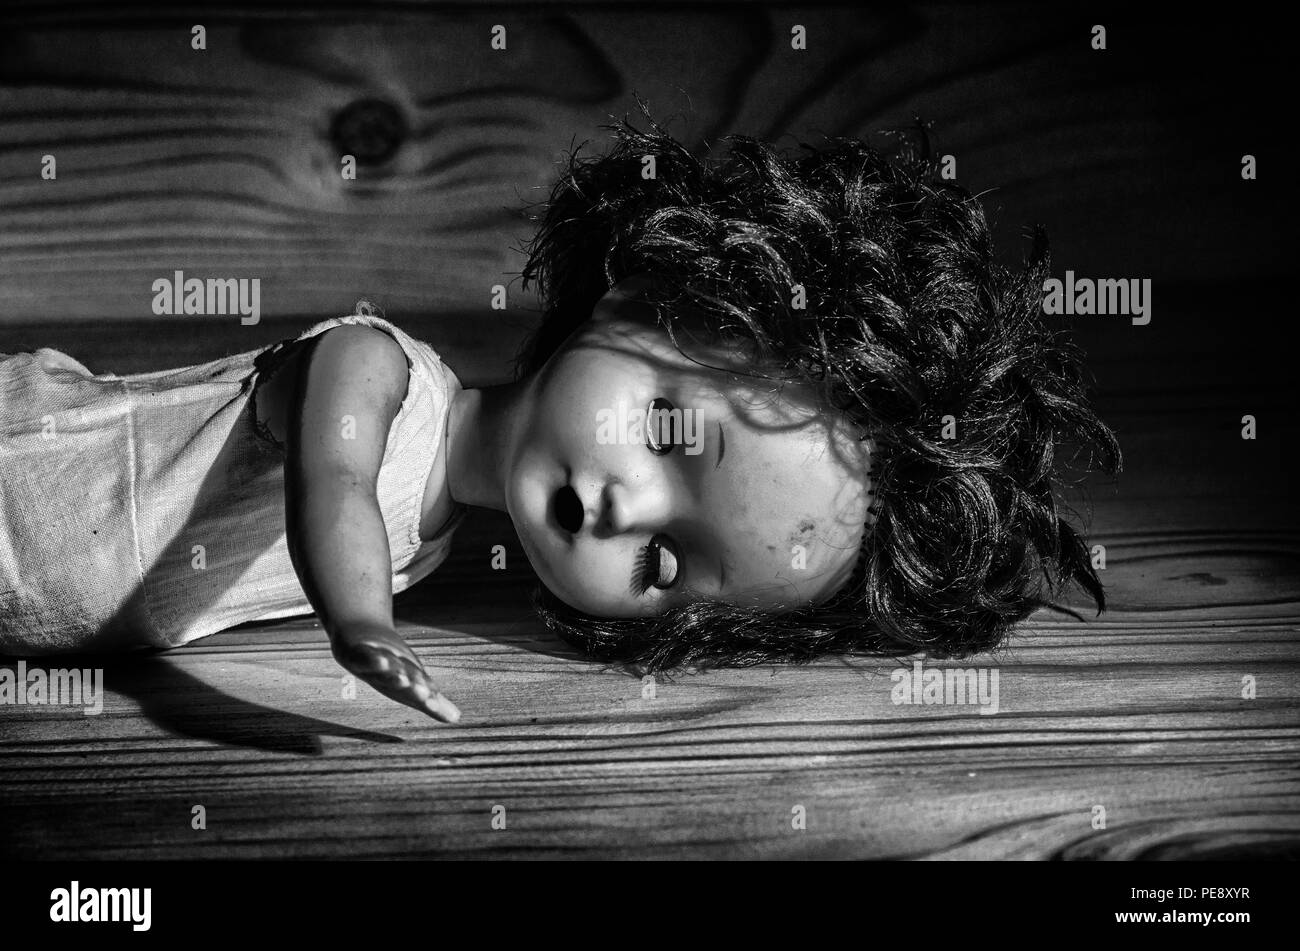 An old broken doll on a wooden table in black and white. Stock Photo